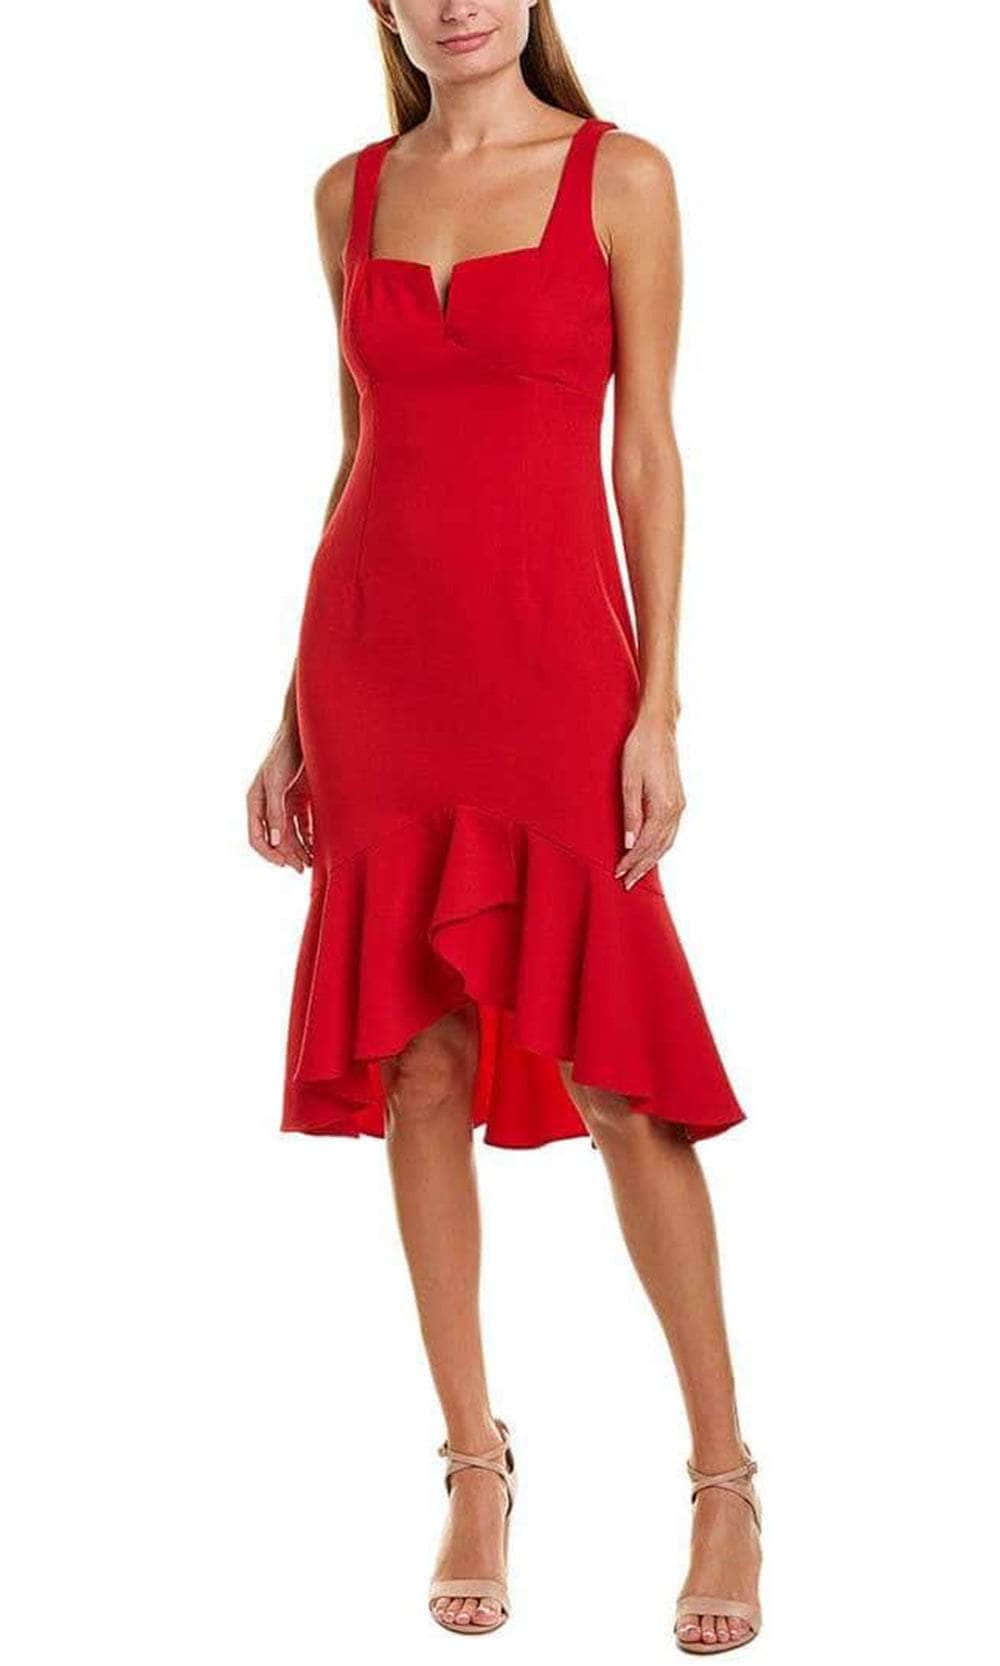 Taylor 1600M - Sweetheart Ruffled Cocktail Dress
